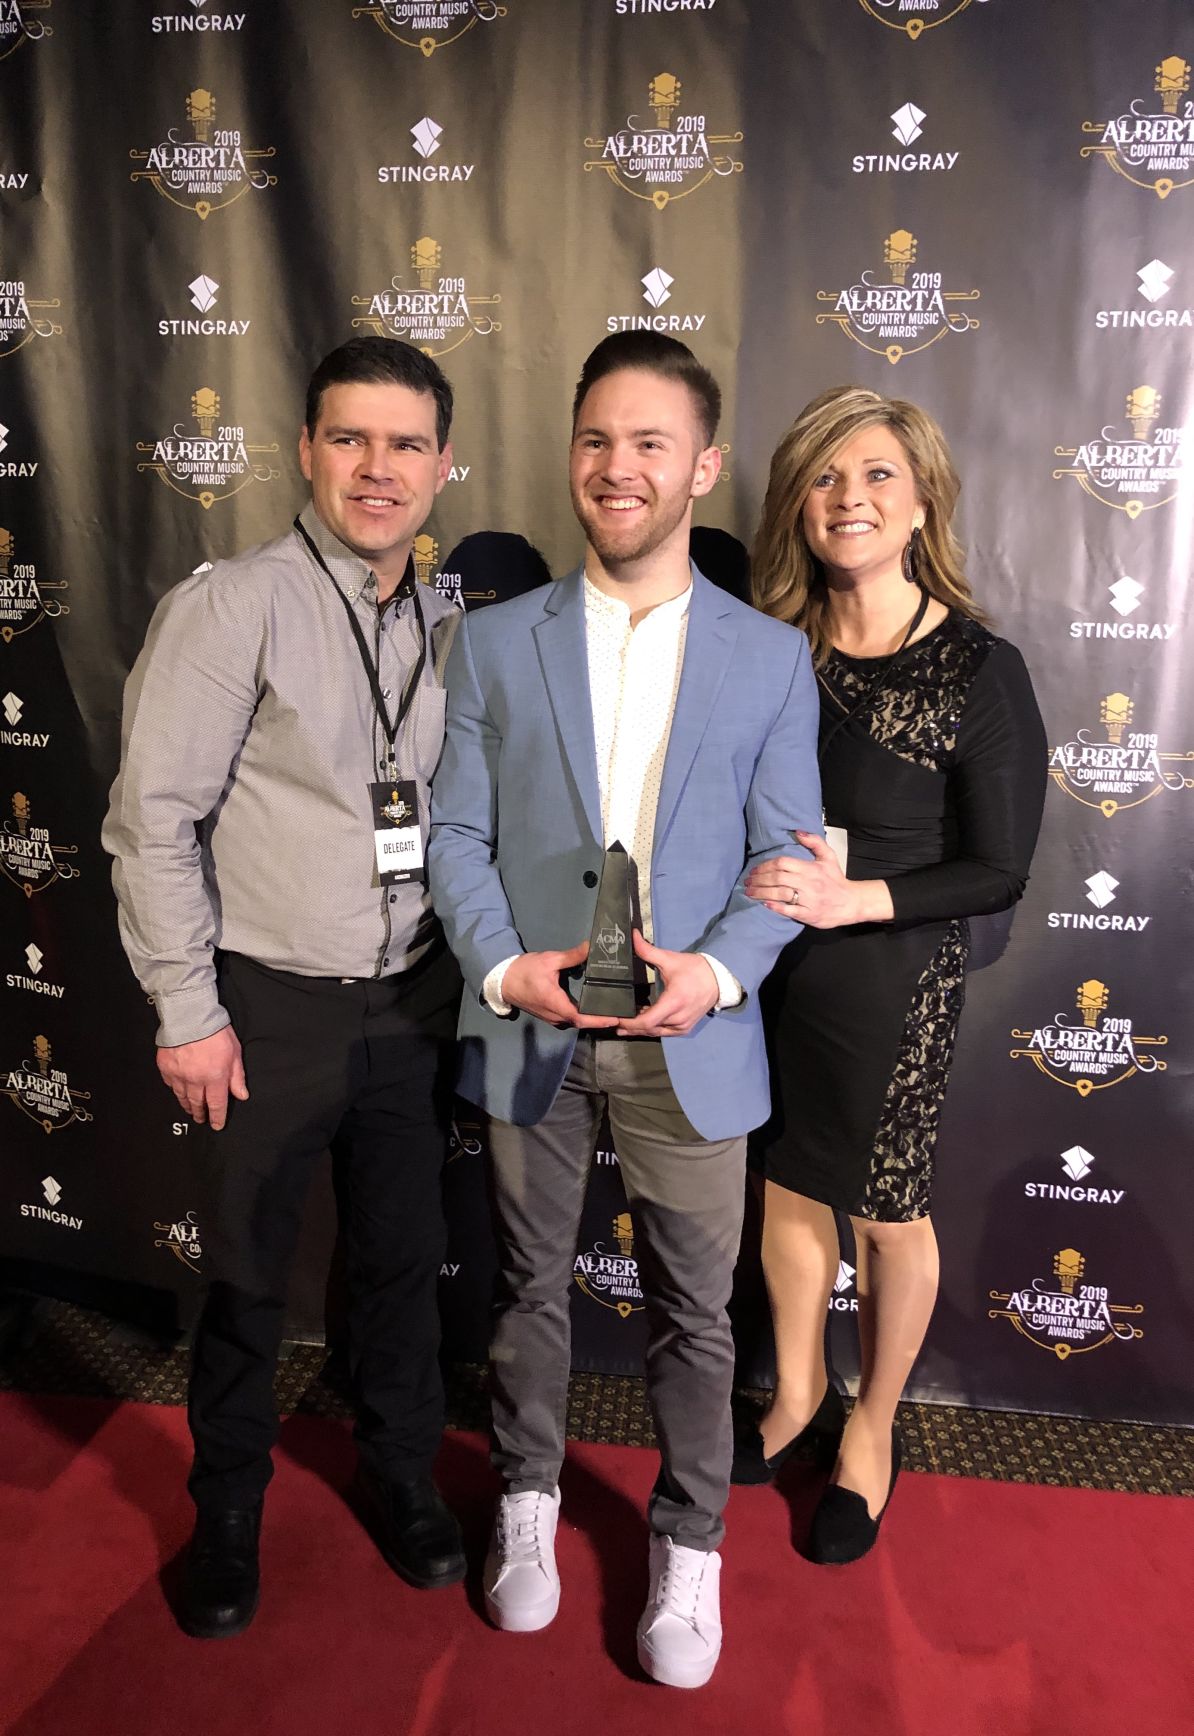 Ben Chase wins first Alberta Country Music Award News